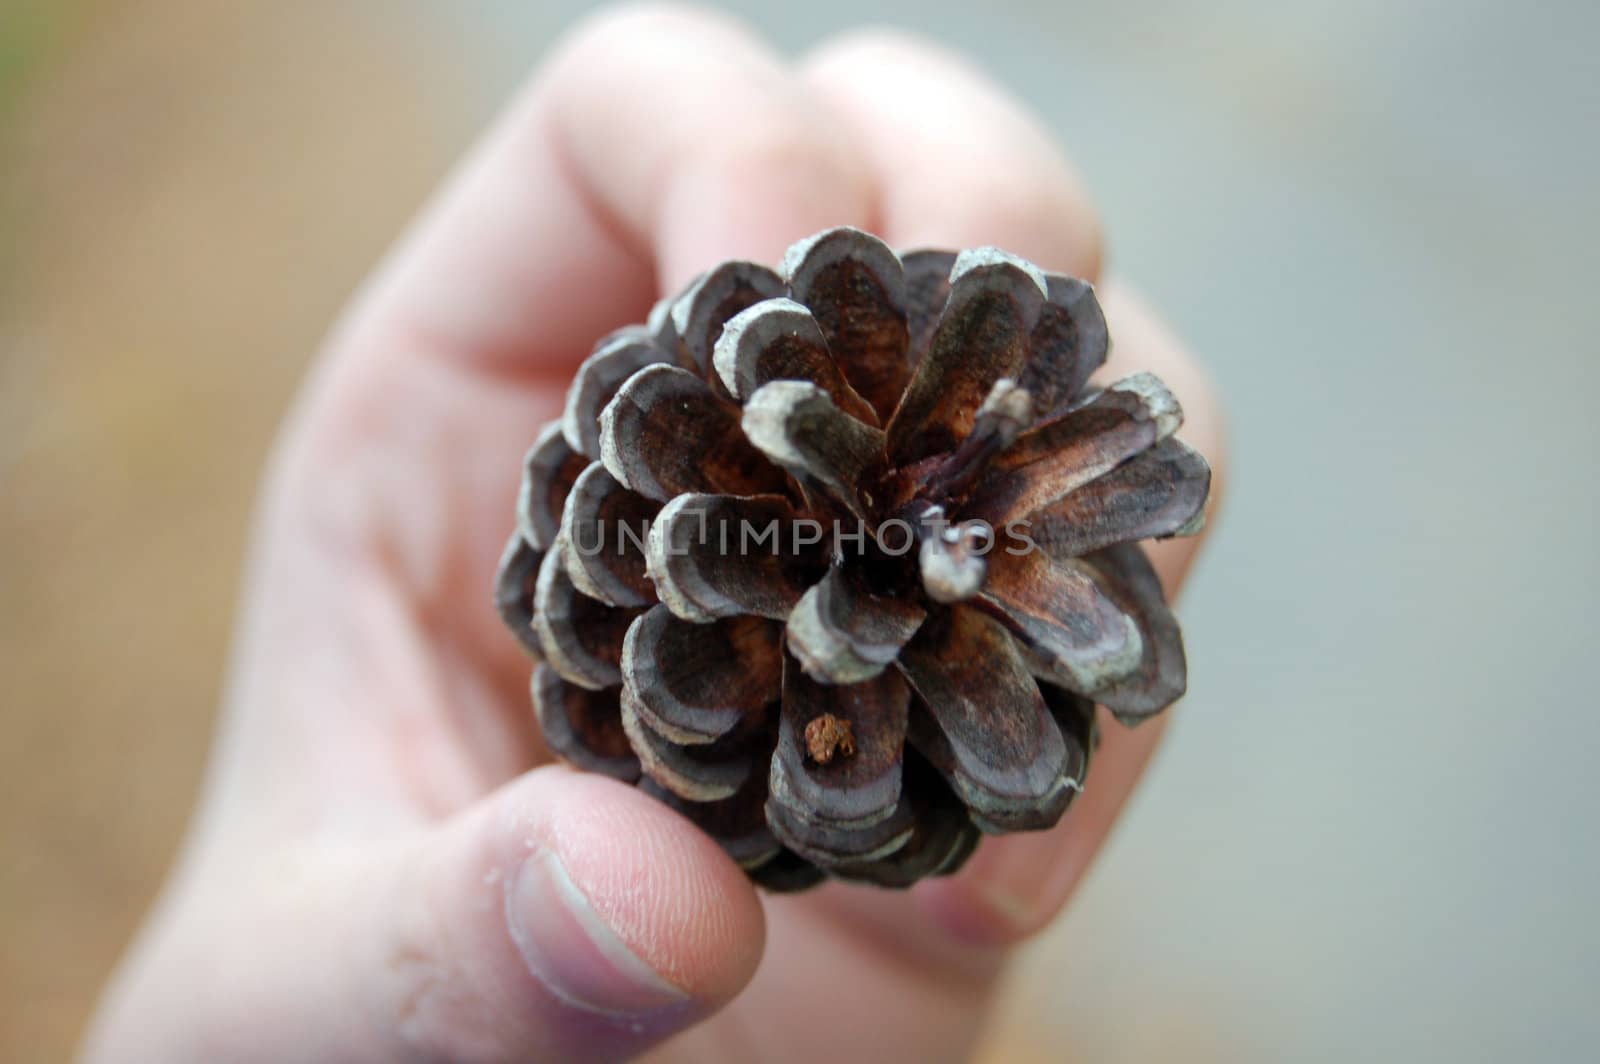 pinecone in hand by mojly